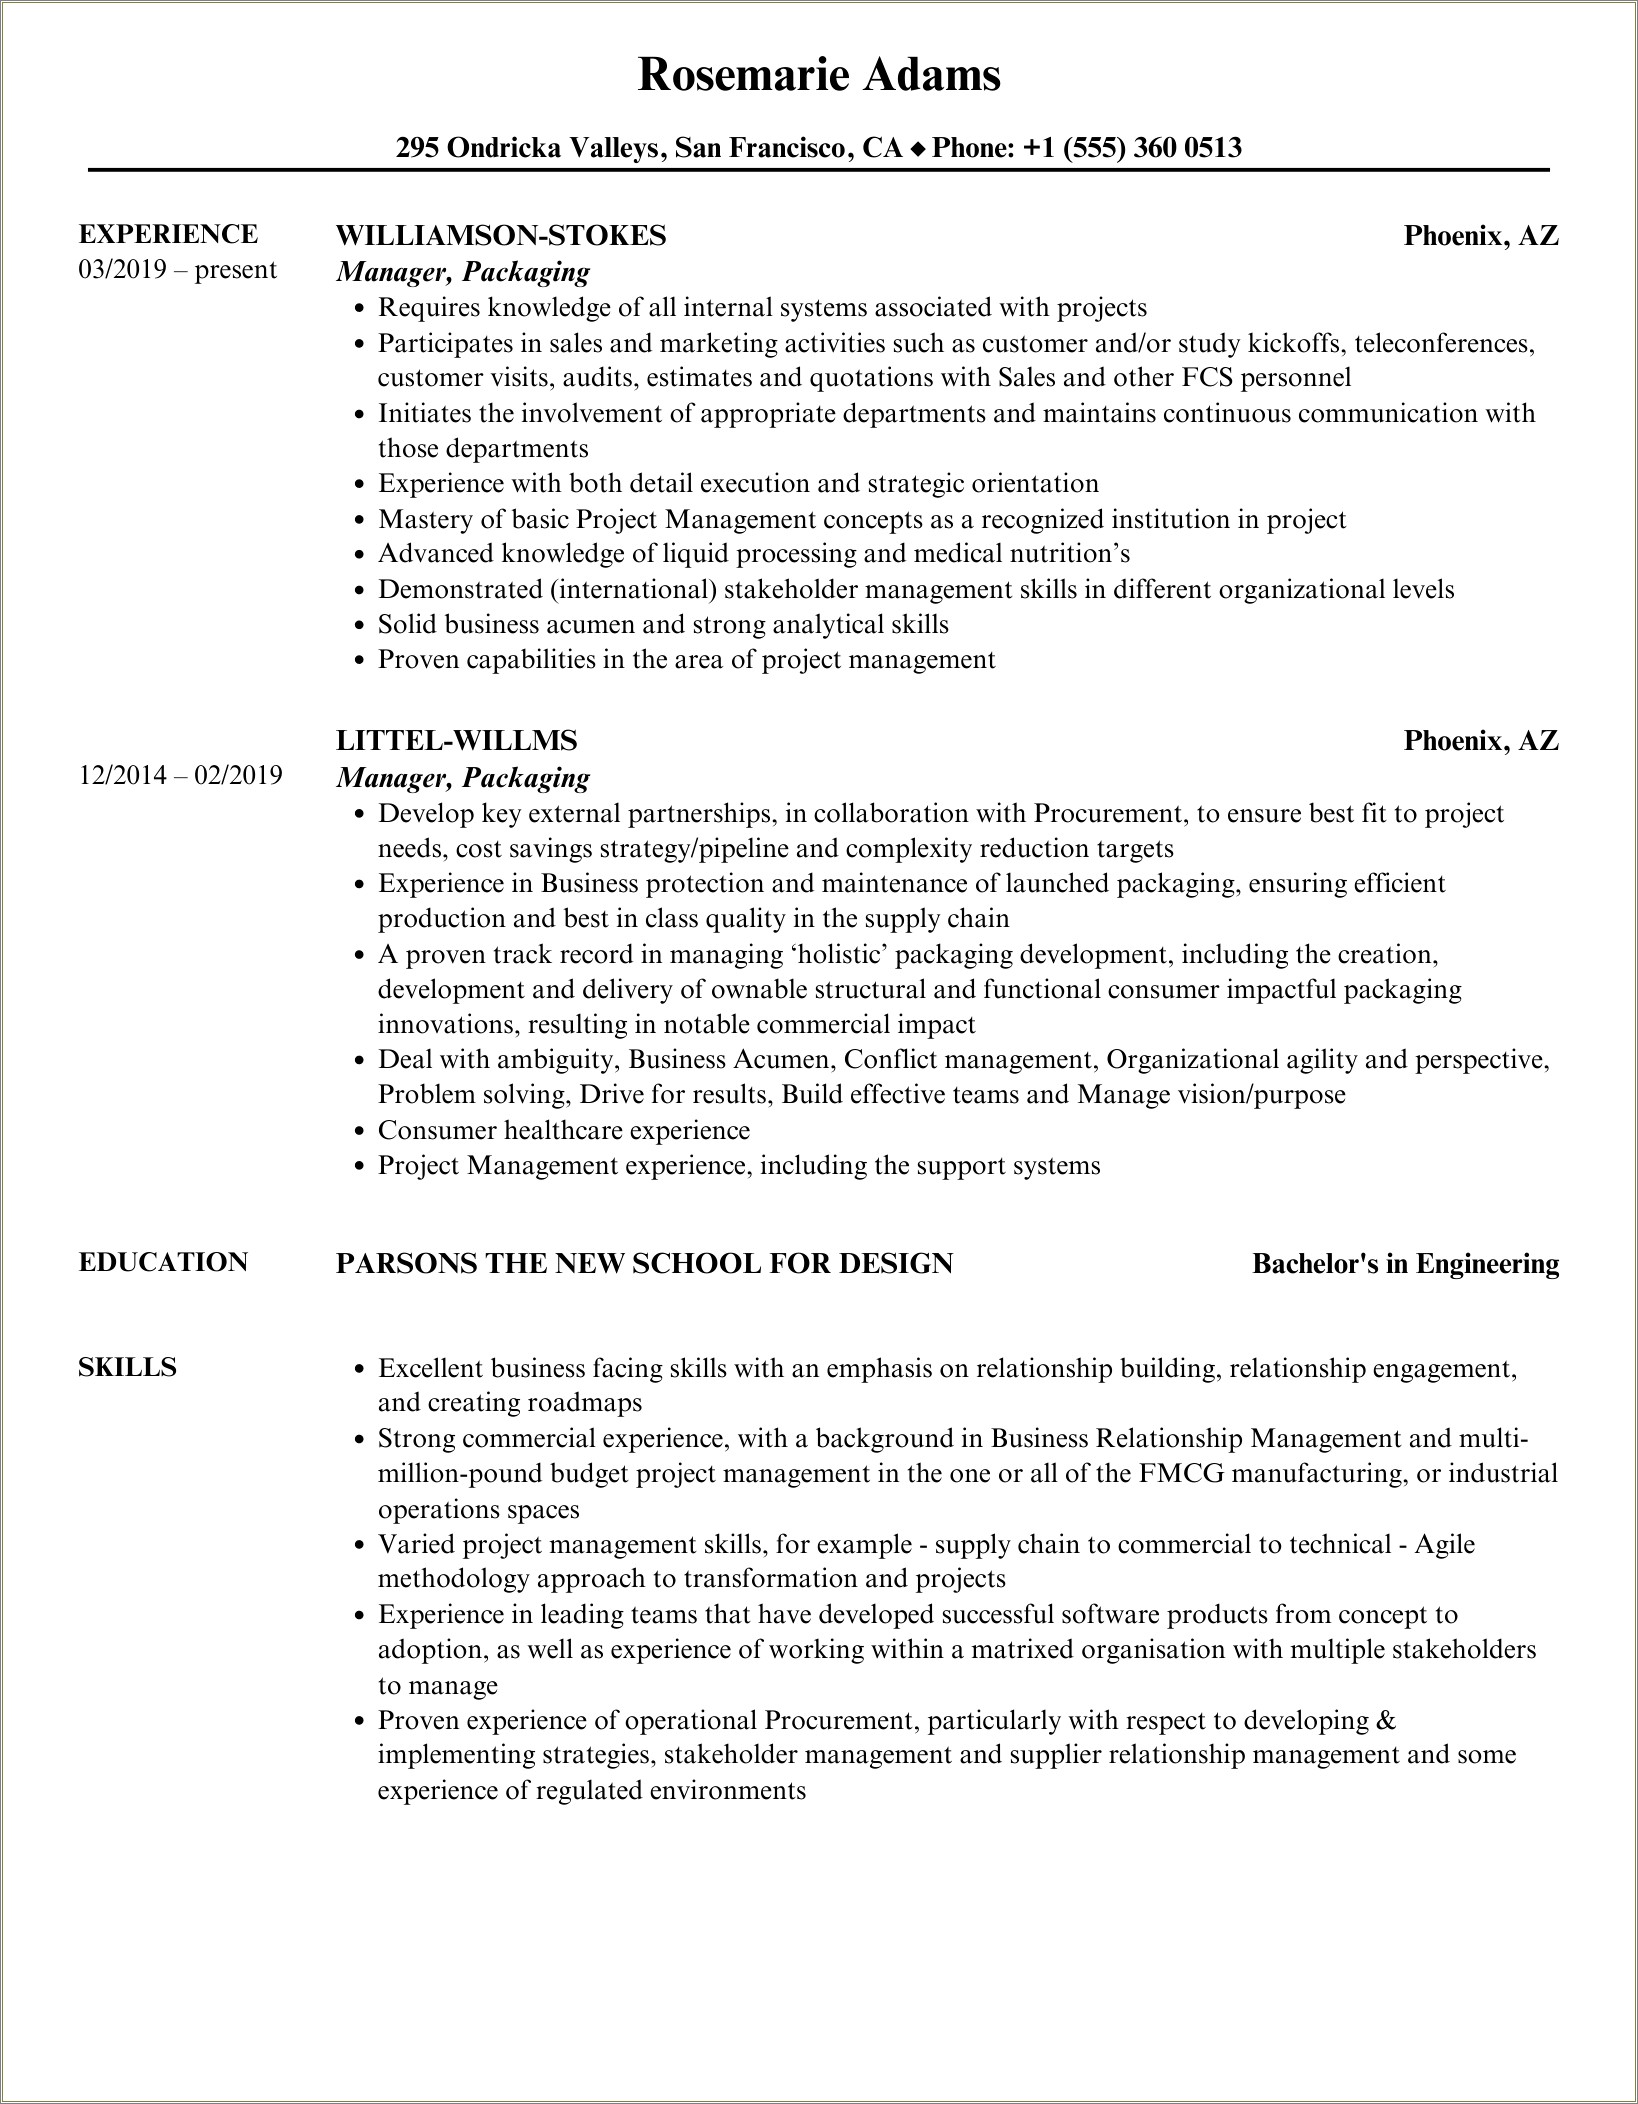 Resume For Packaging Manager In Pharma Company